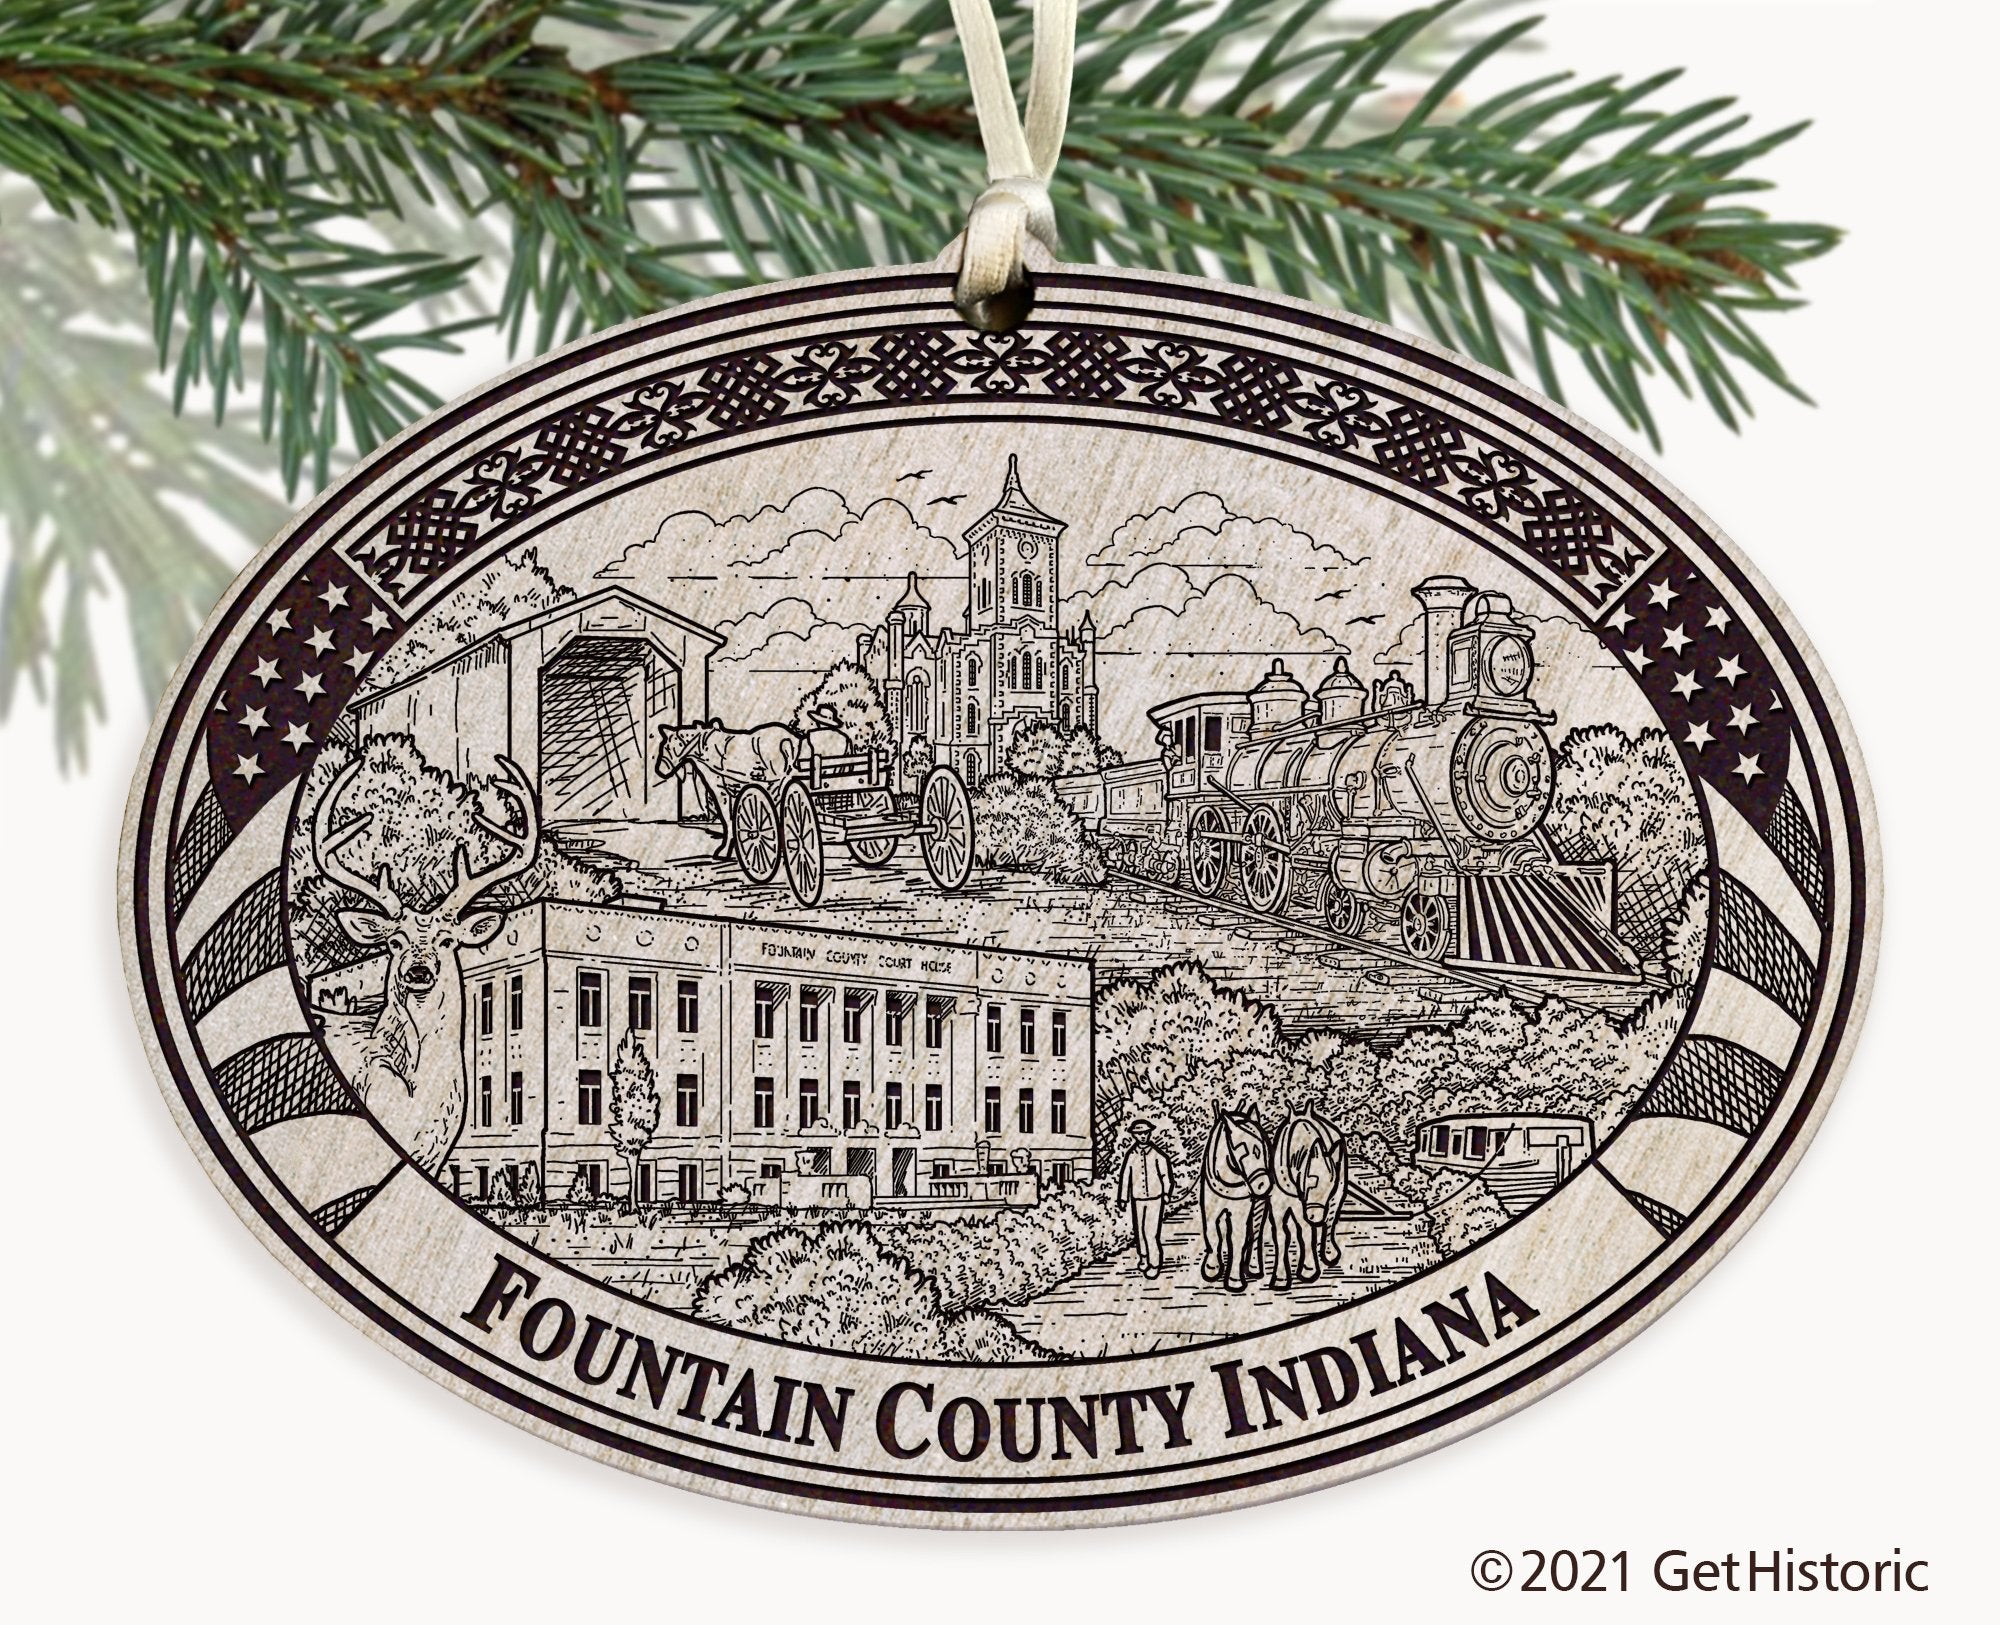 Fountain County Indiana Engraved Ornament